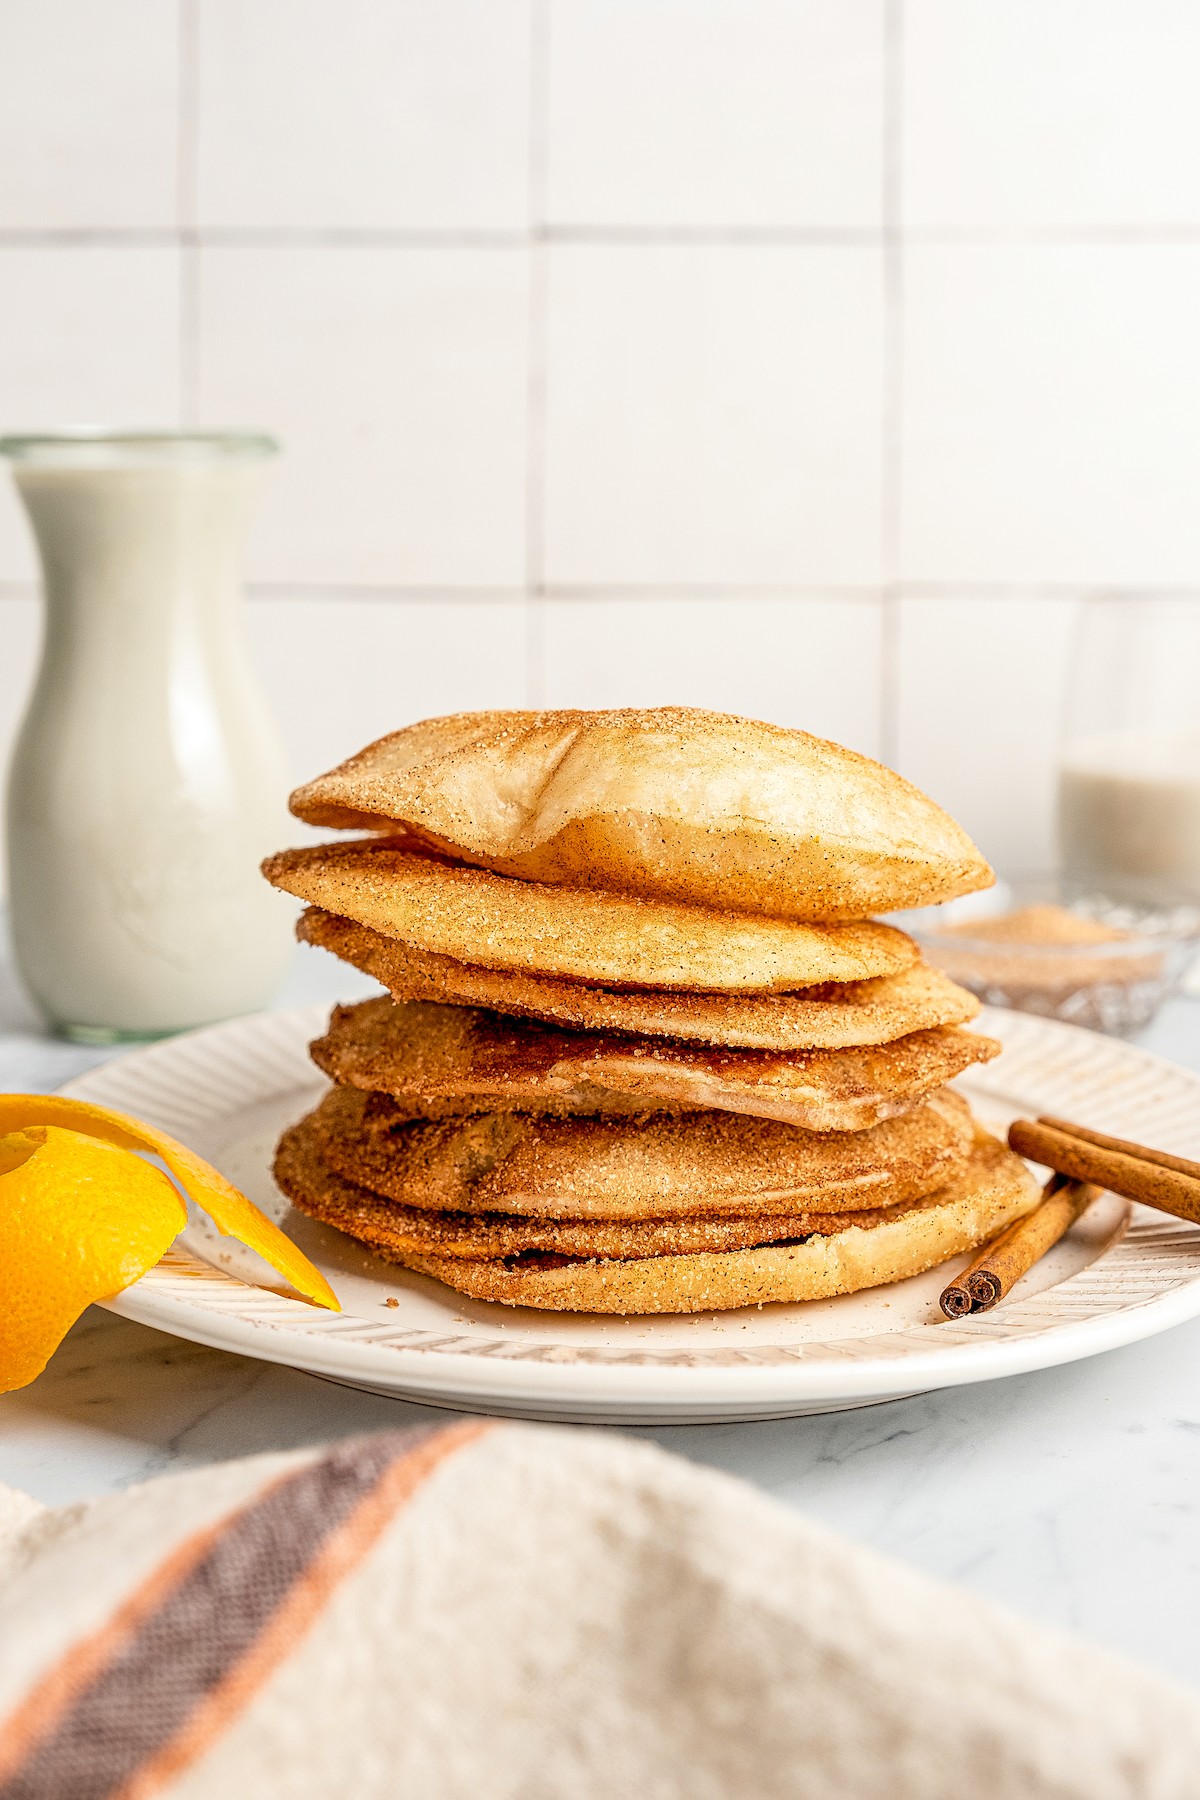 Buñuelos stacked on top of each other on a plate.